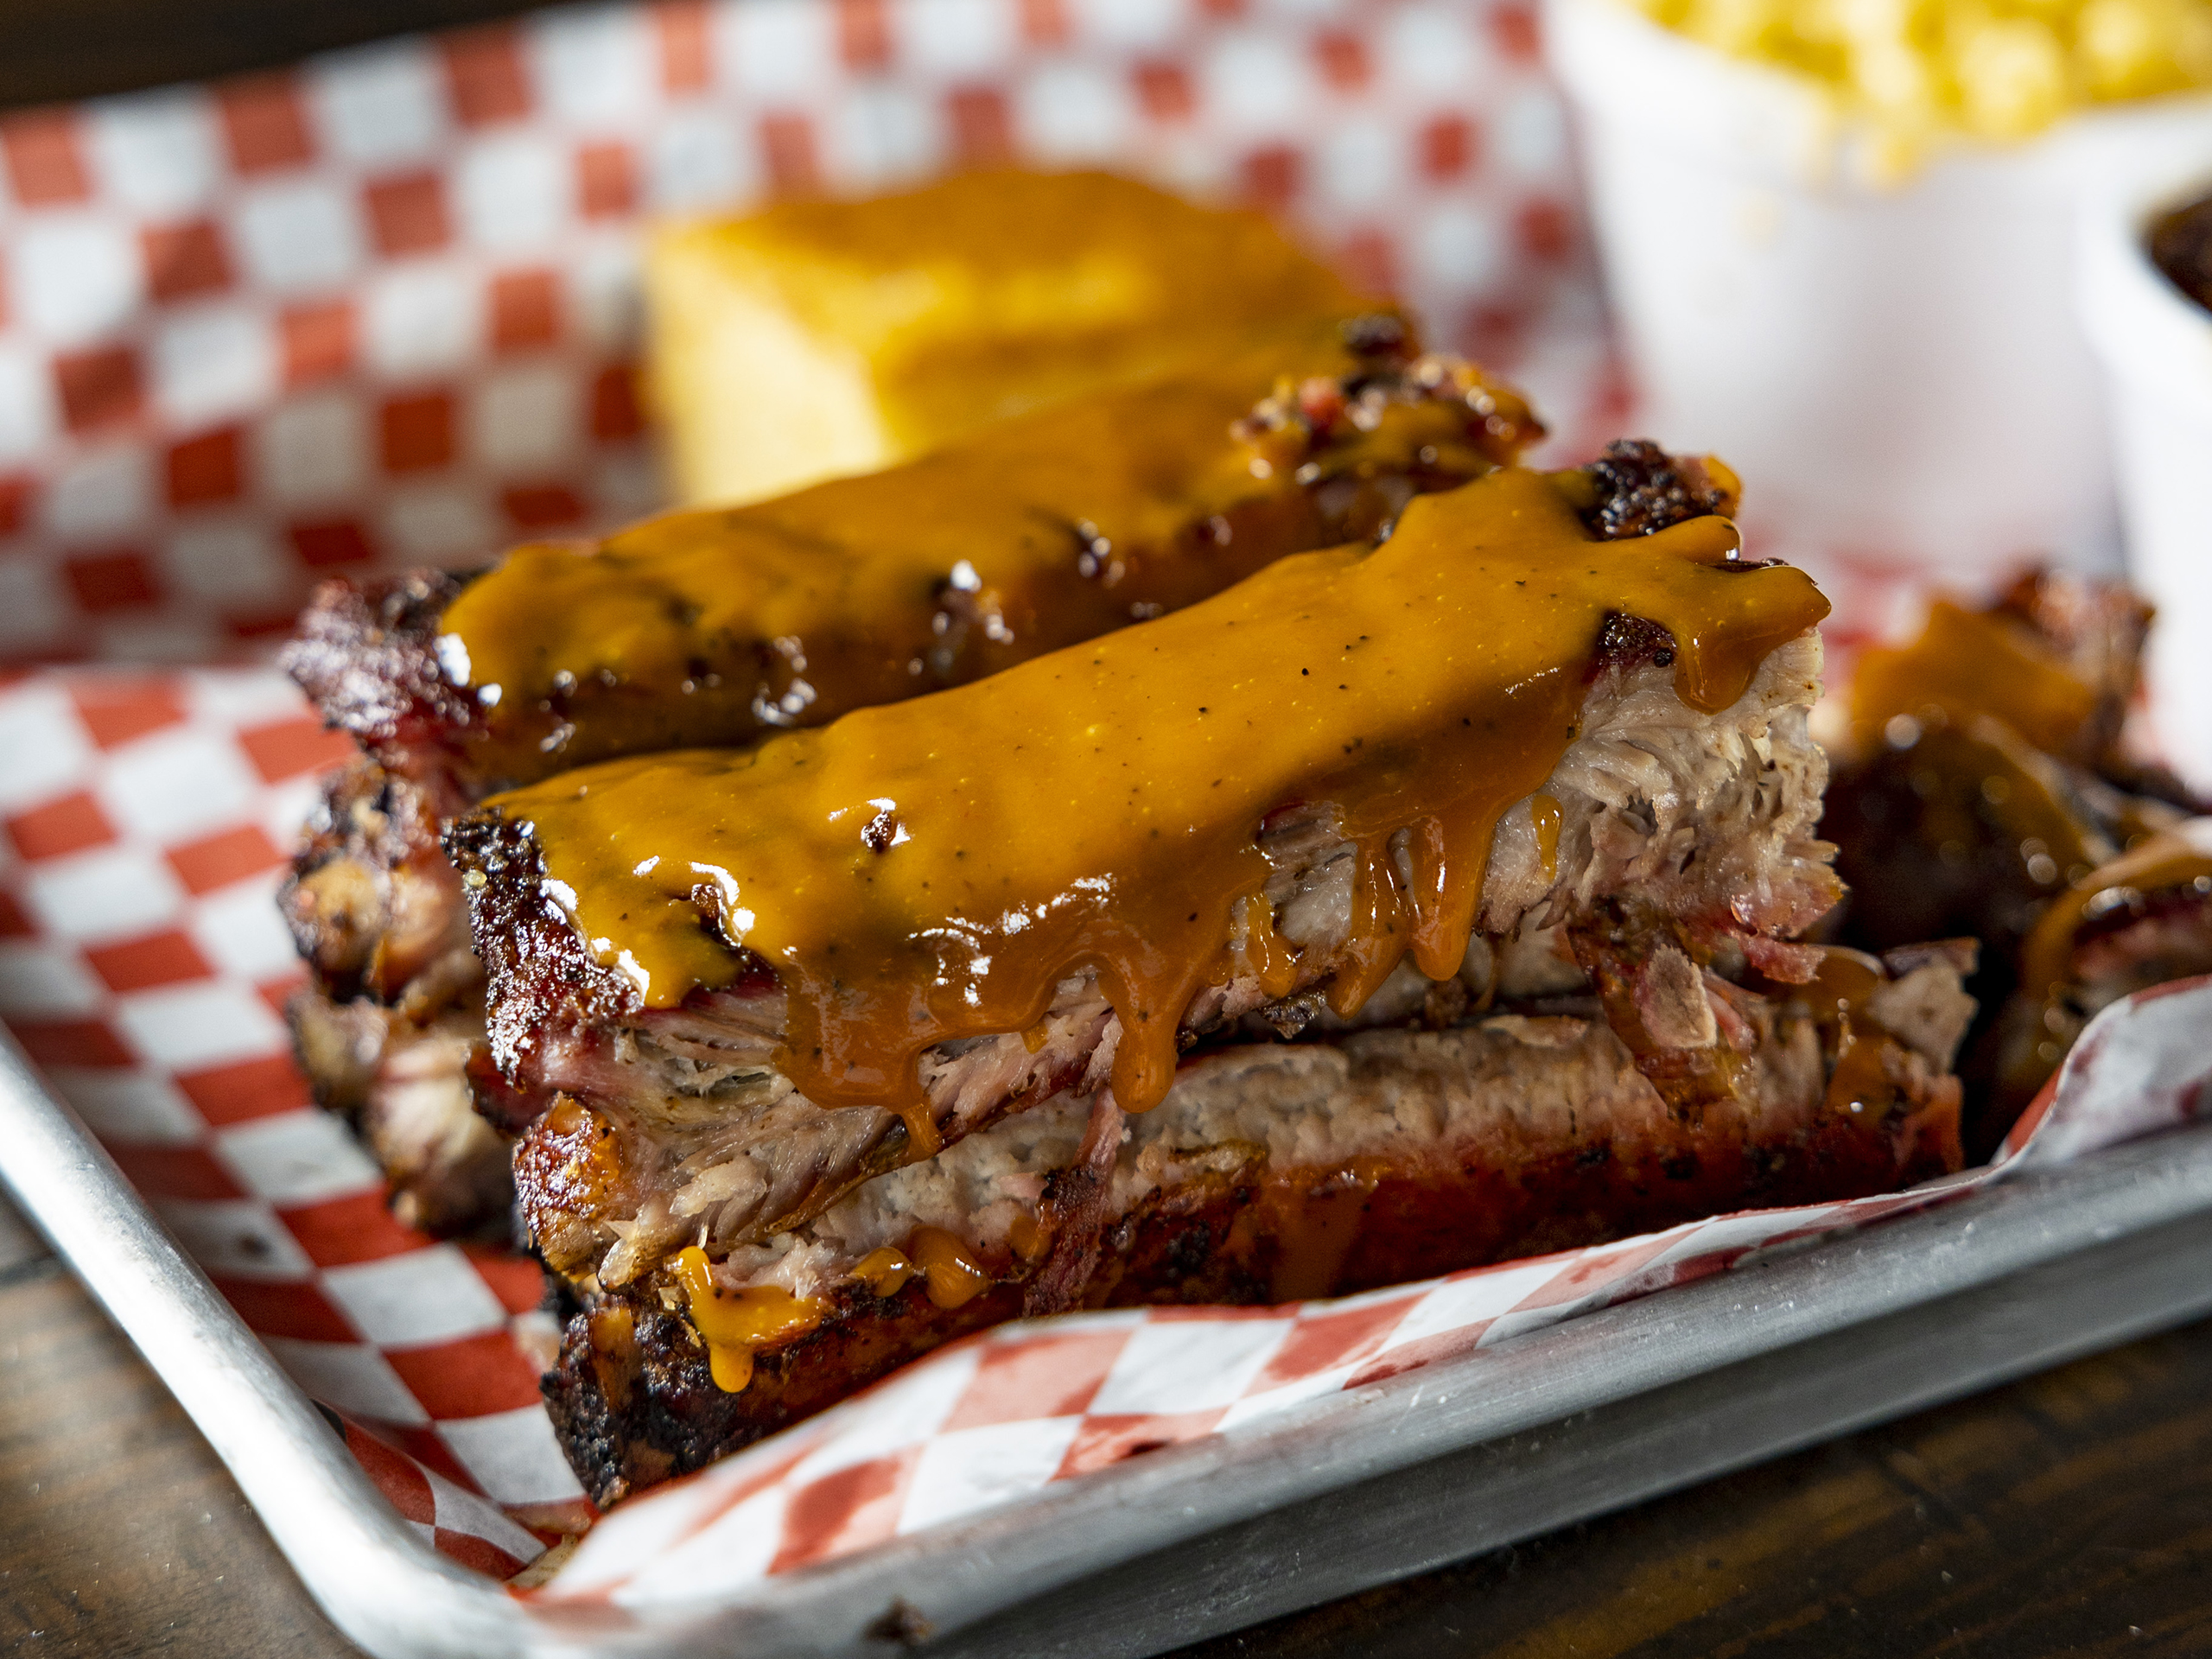 Troy's Barbecue in West Palm Beach and Boynton Beach, Florida.